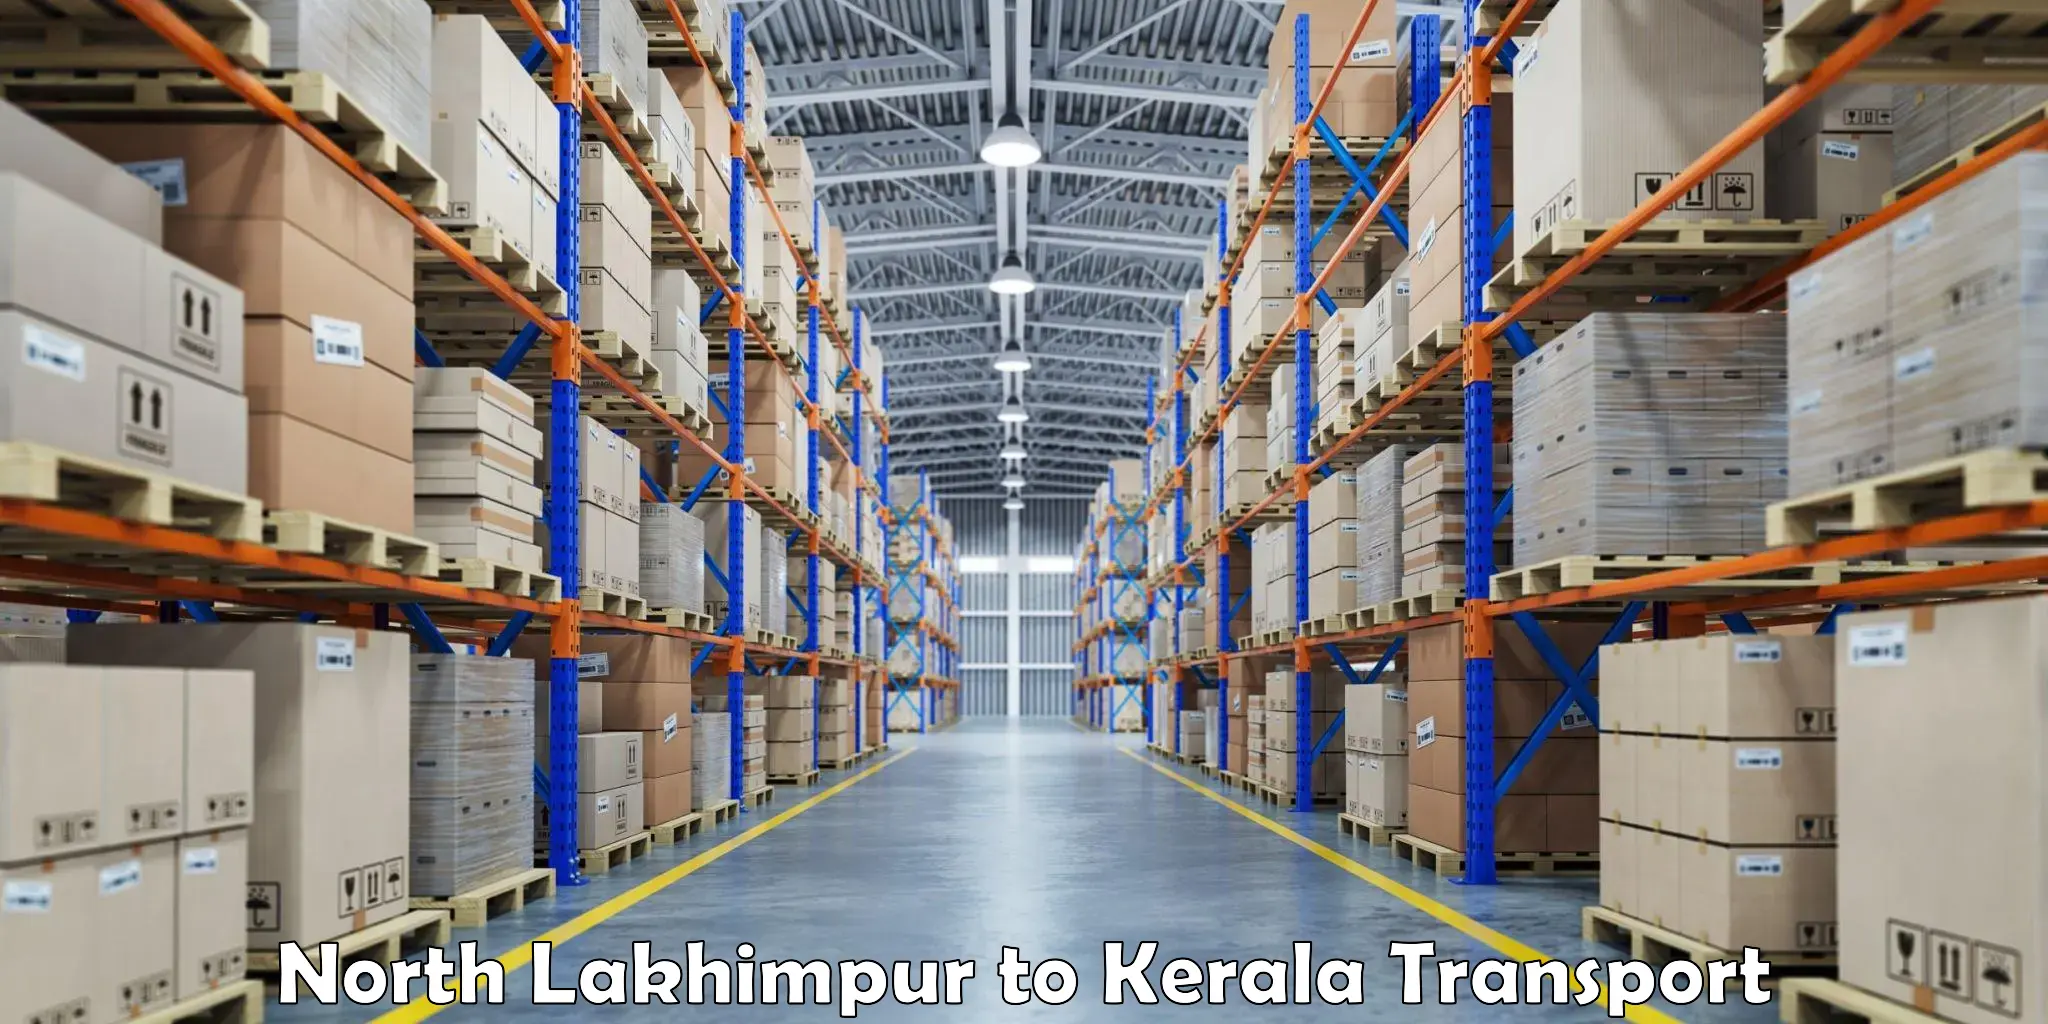 Commercial transport service North Lakhimpur to Piravom